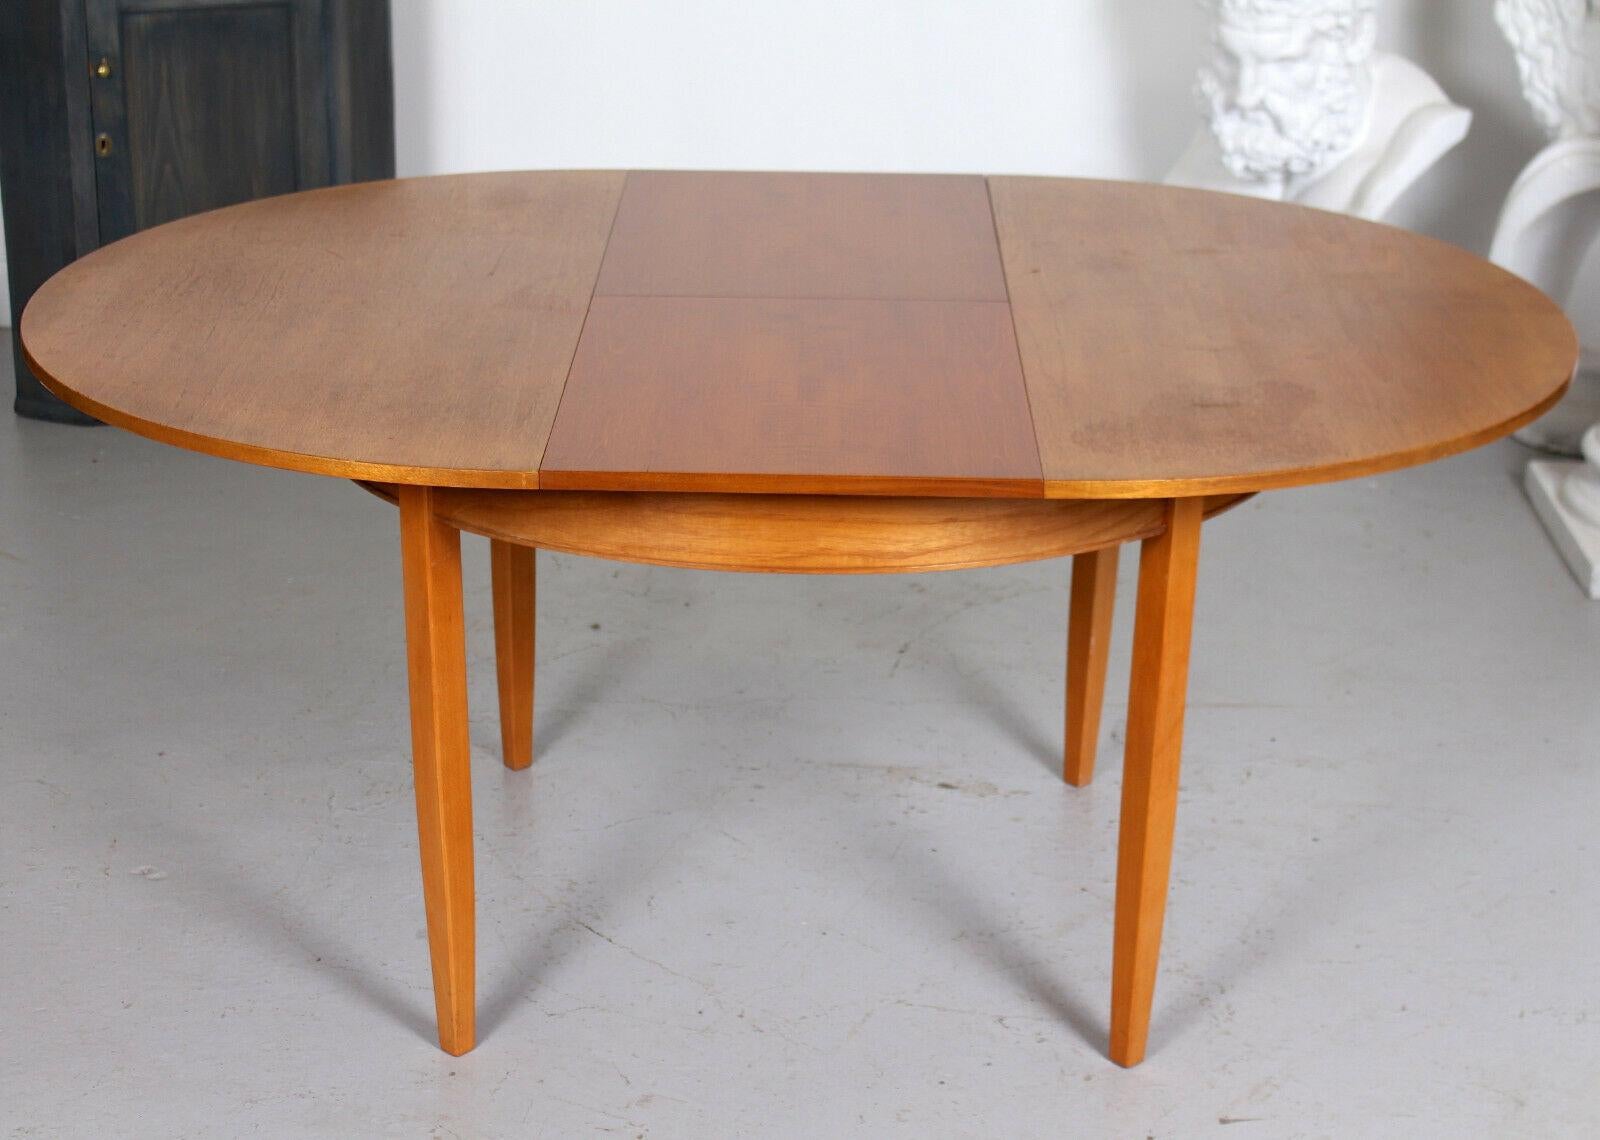 20th Century English Teak Dining Table and 4 Chairs